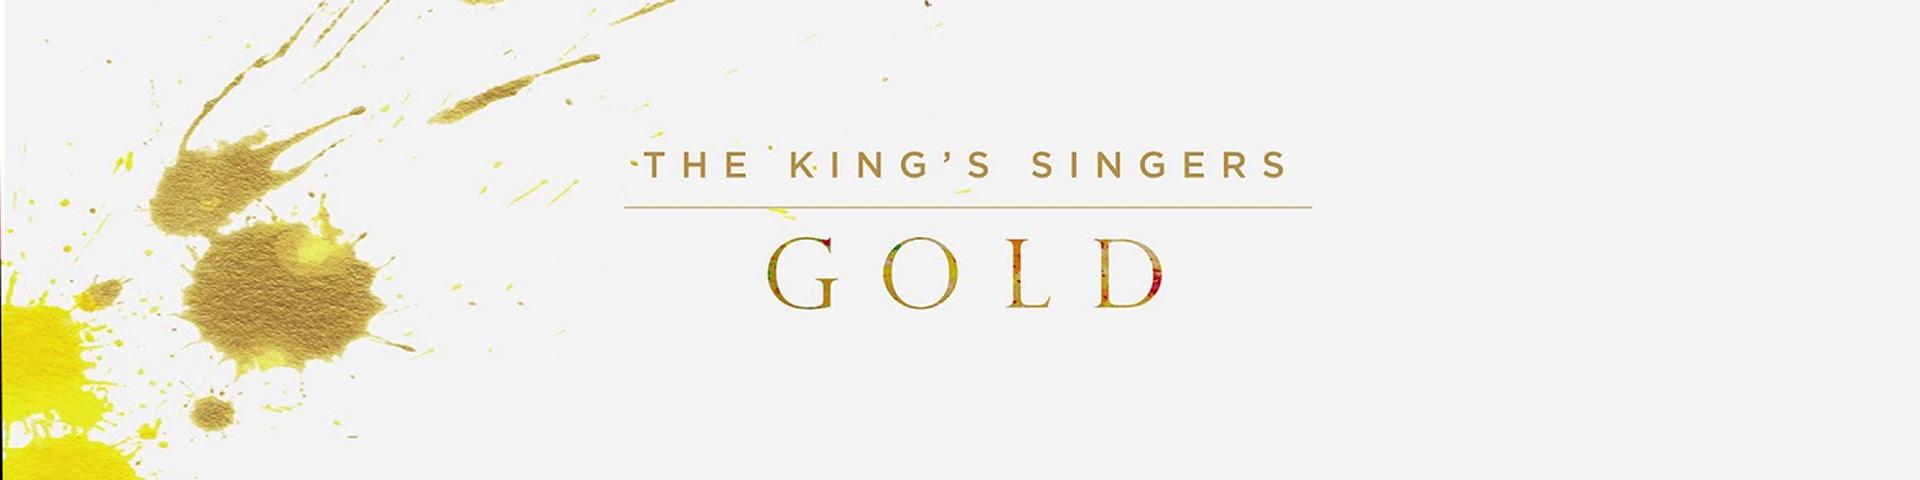 GOLD - THE KING'S SINGERS